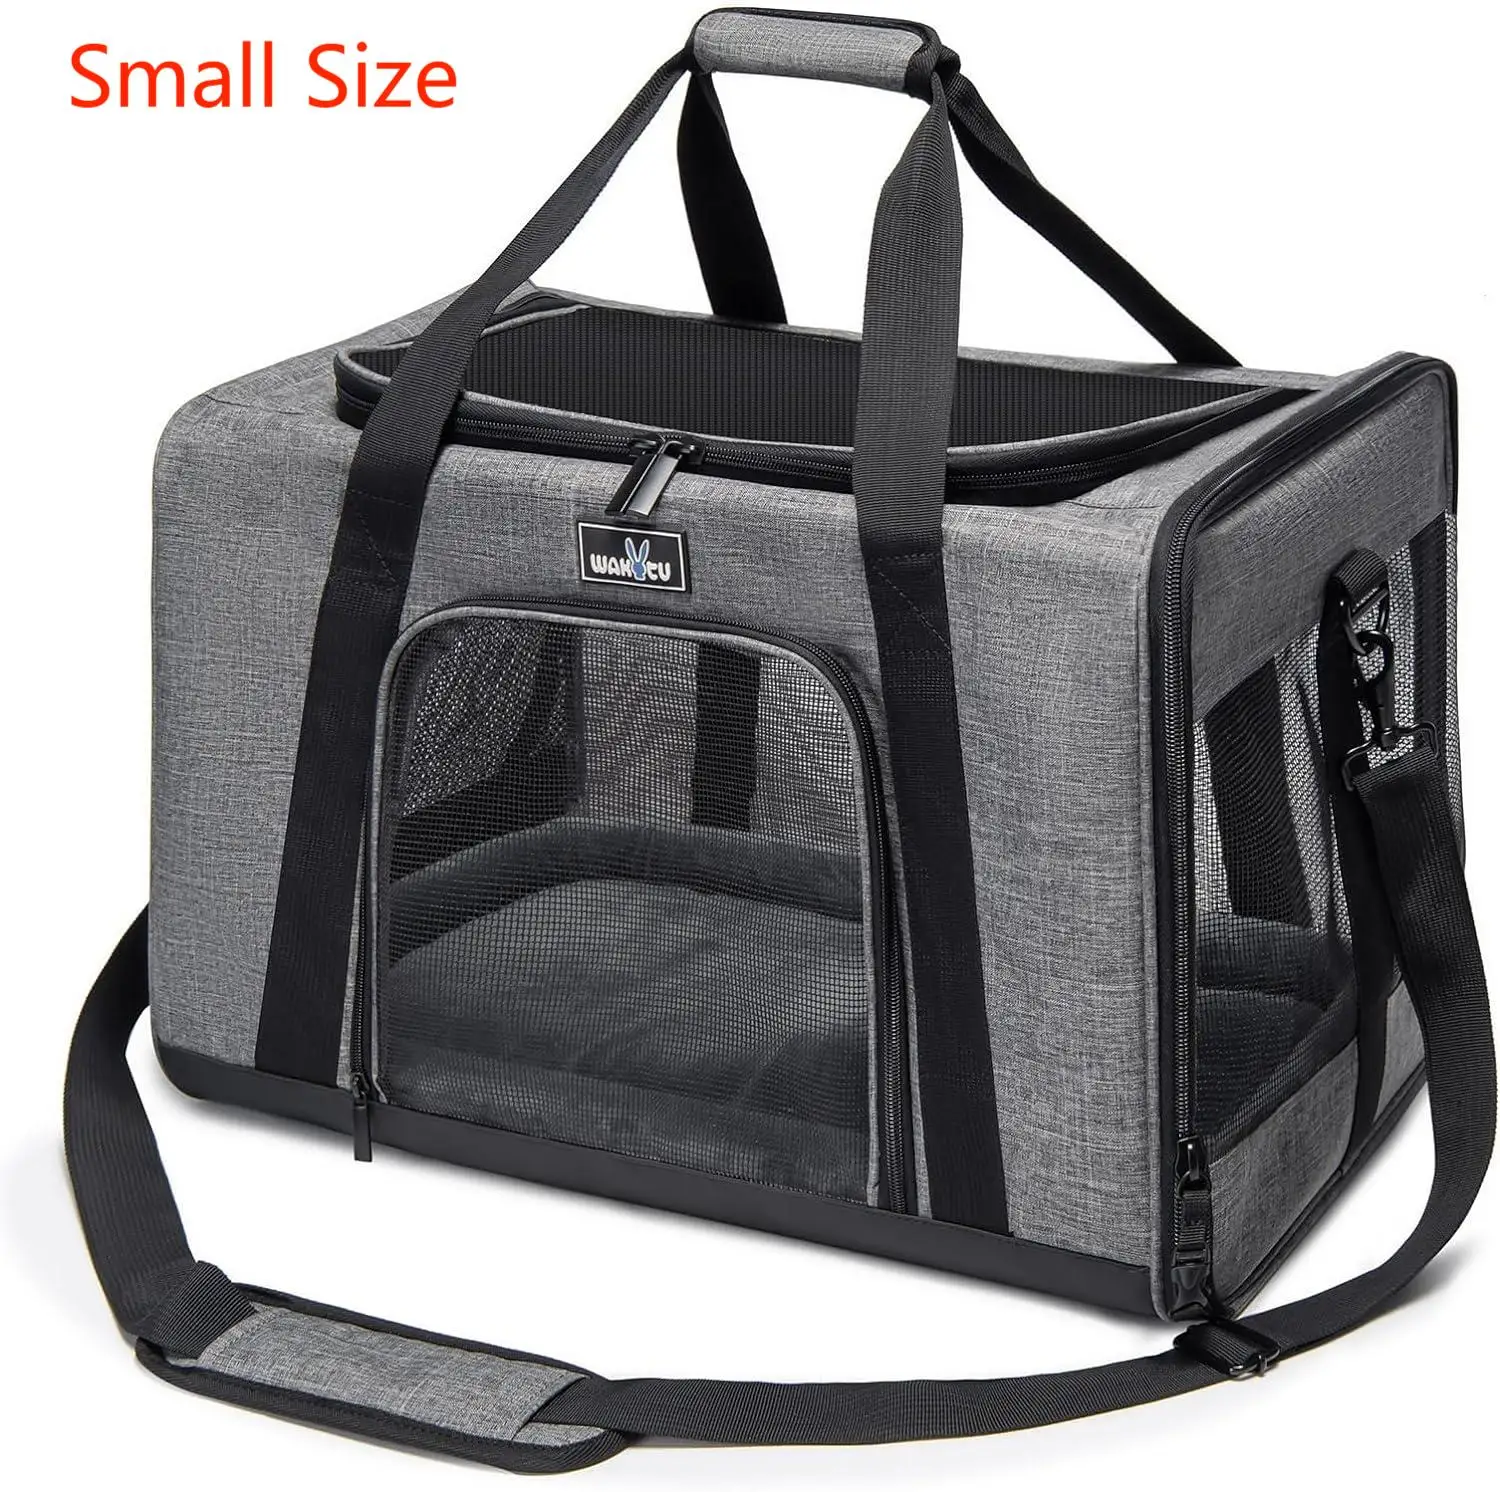 

Dog Carrier Bag Soft Side Cat Pet Carriers Travel Bags TSA Airline Approved Transport For Small Dogs Cats with Carrying Strap